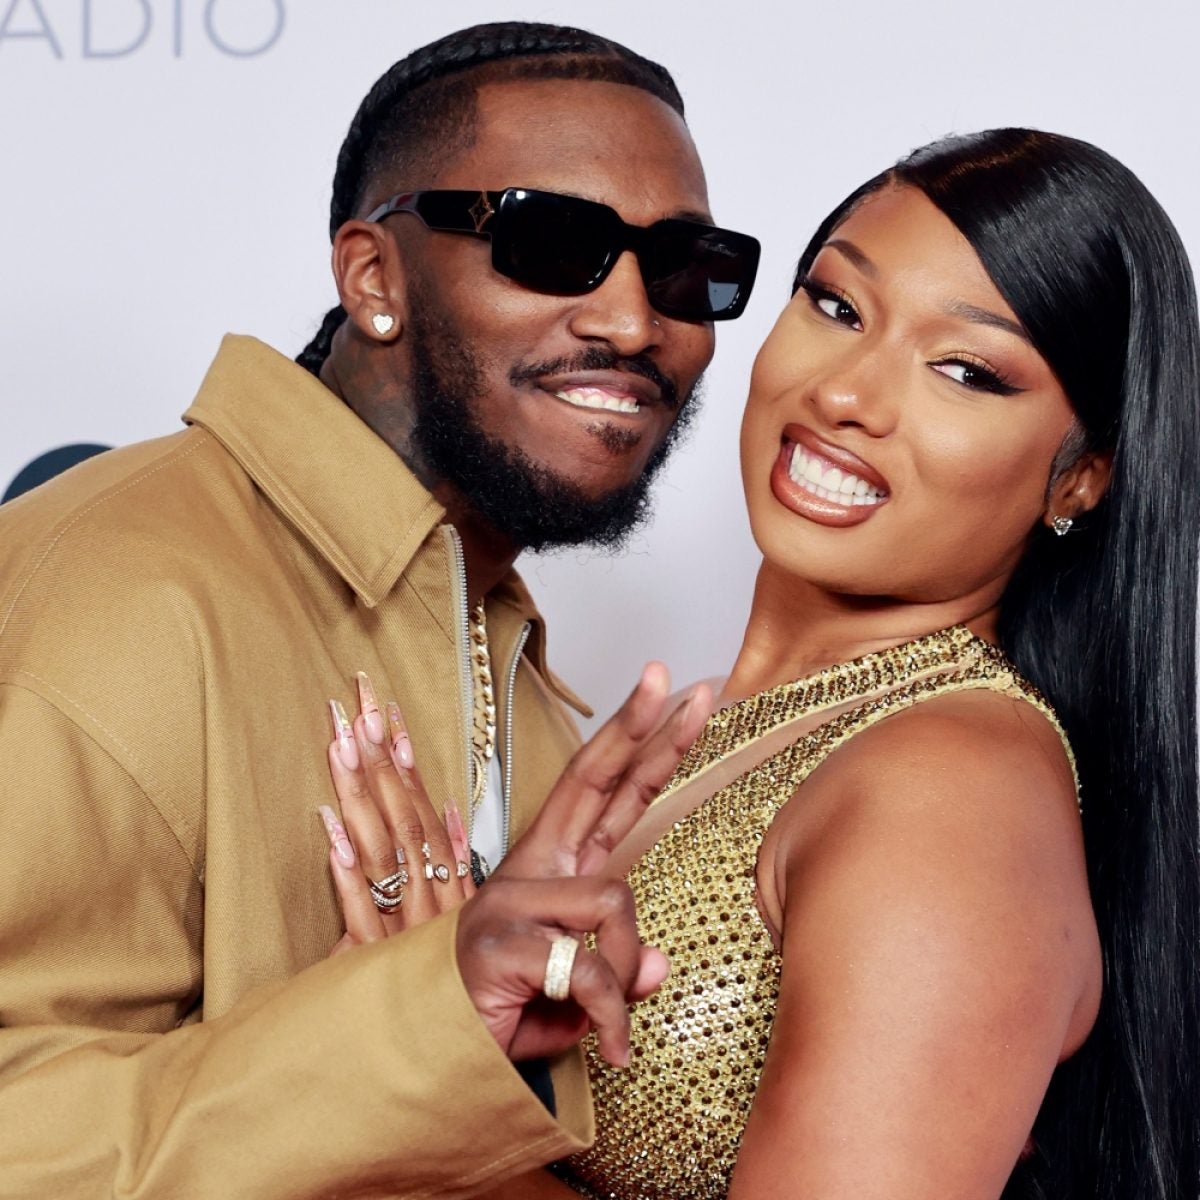 'He Makes My Heart Feel Good': Megan Thee Stallion On What Makes Boyfriend Pardison Fontaine So Special